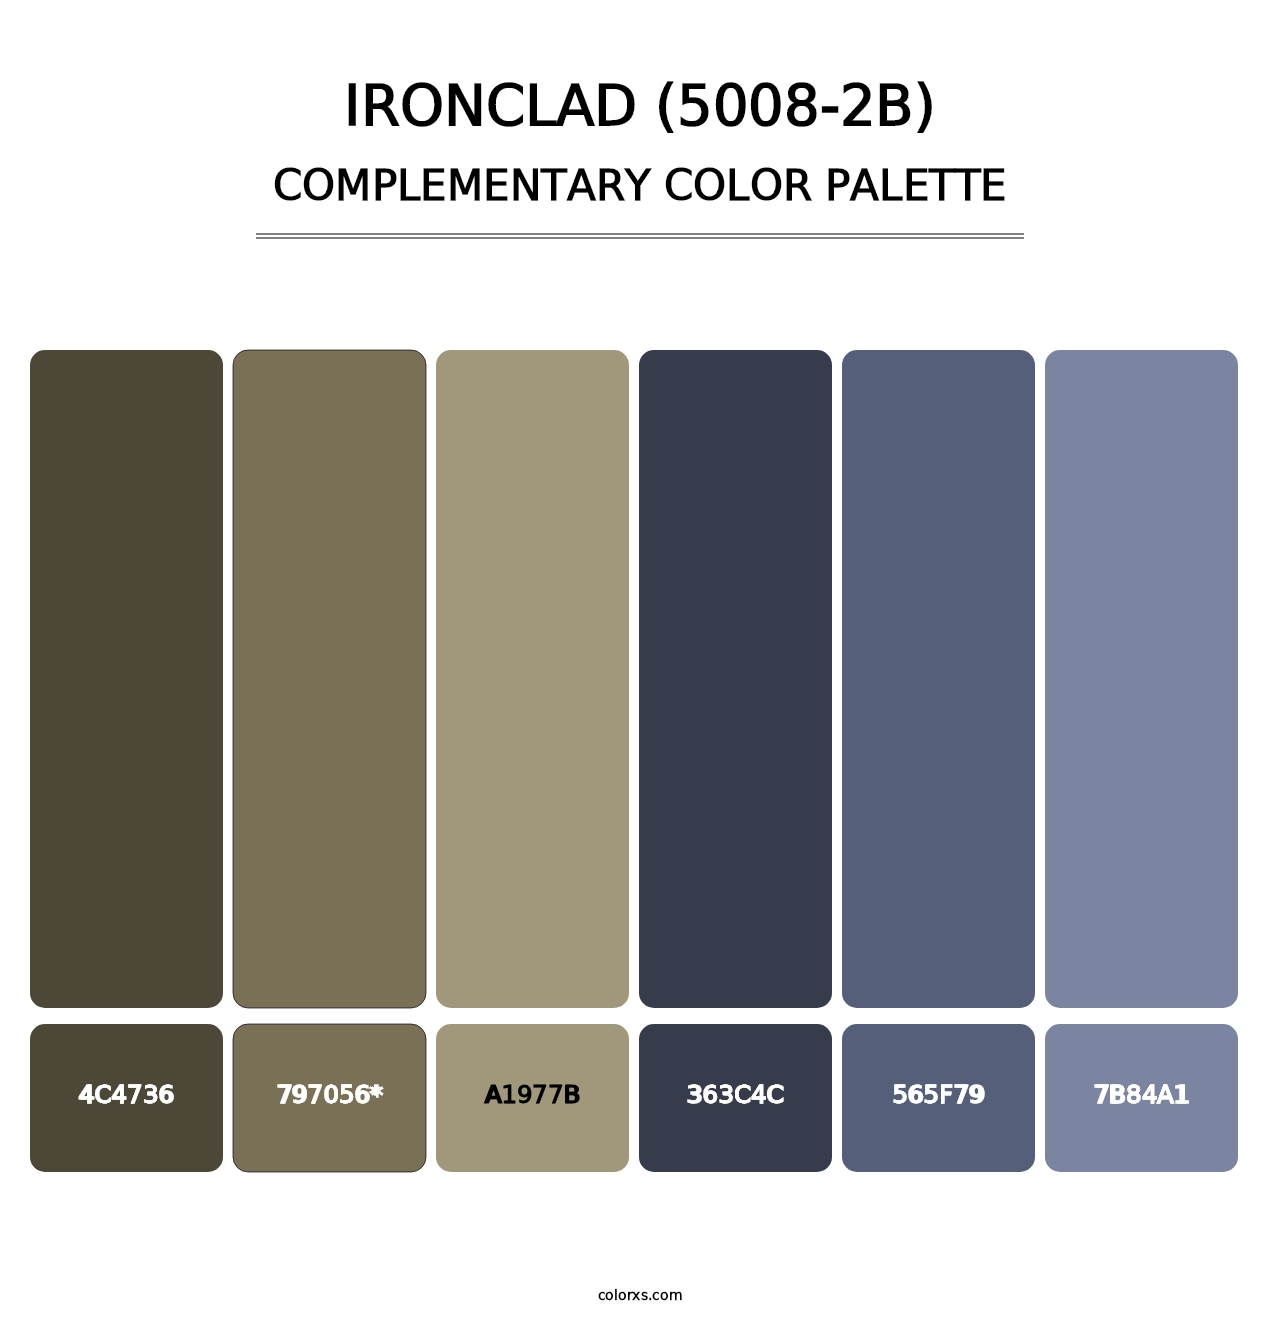 Ironclad (5008-2B) - Complementary Color Palette